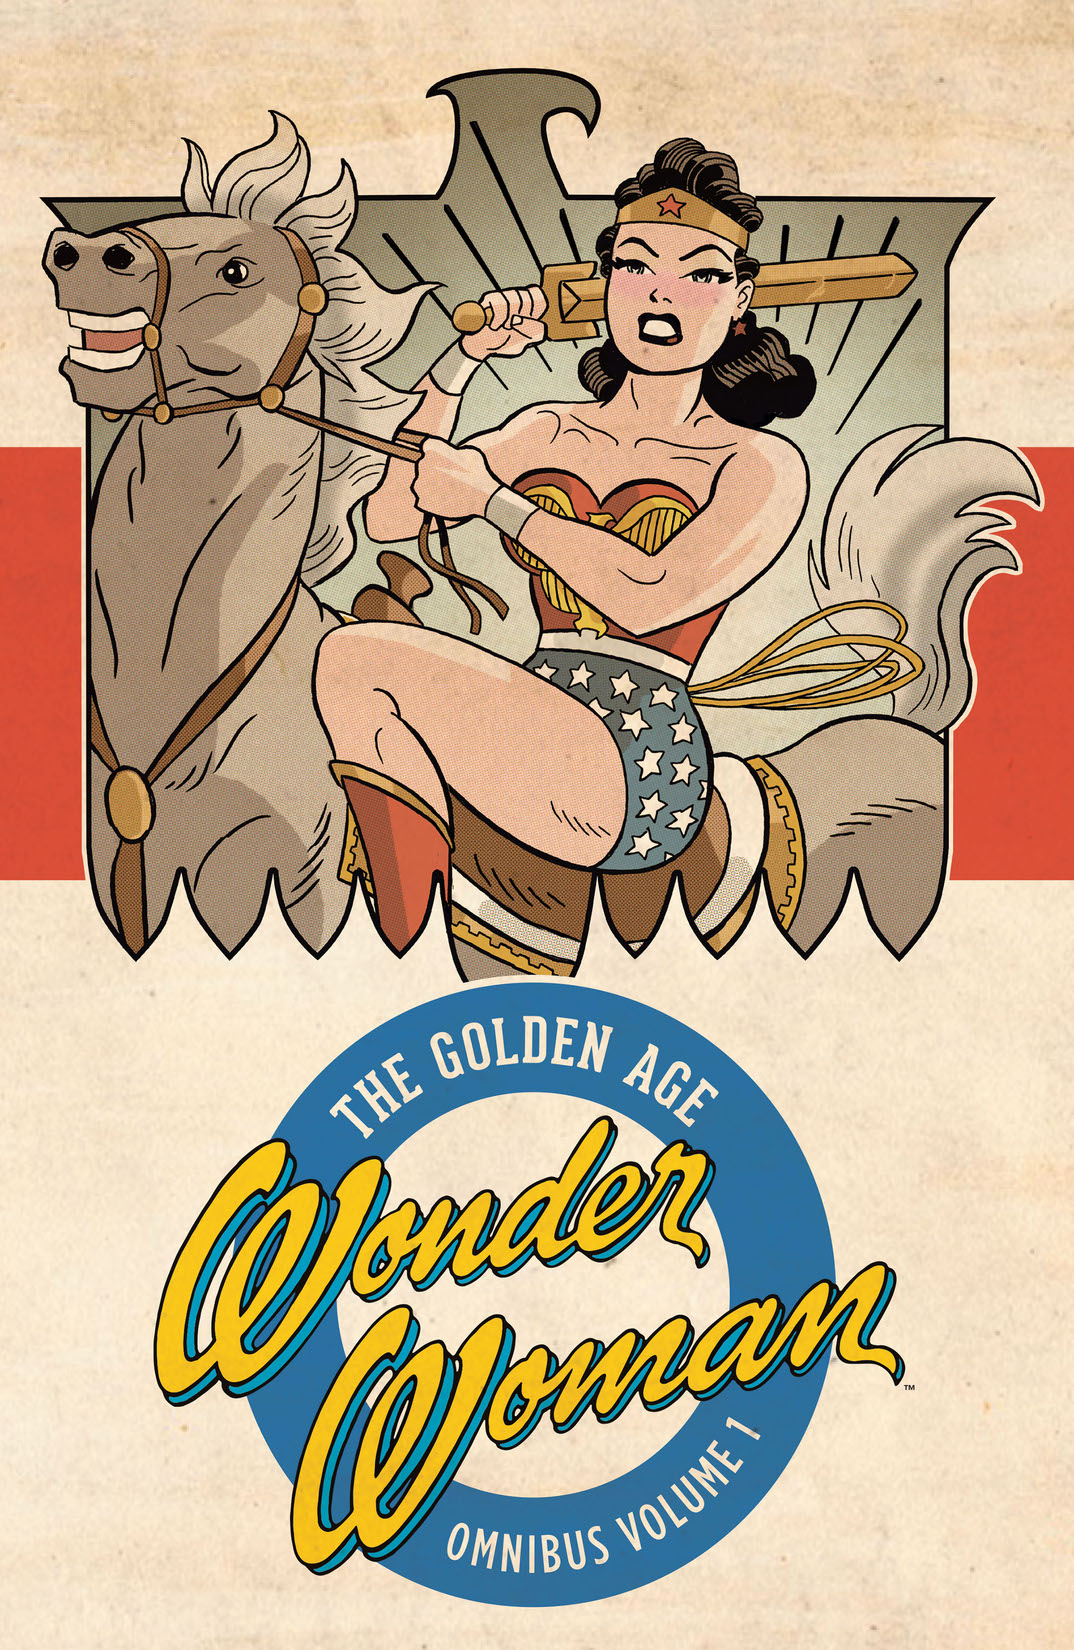 Wonder Woman: The Golden Age Vol. 1 preview images